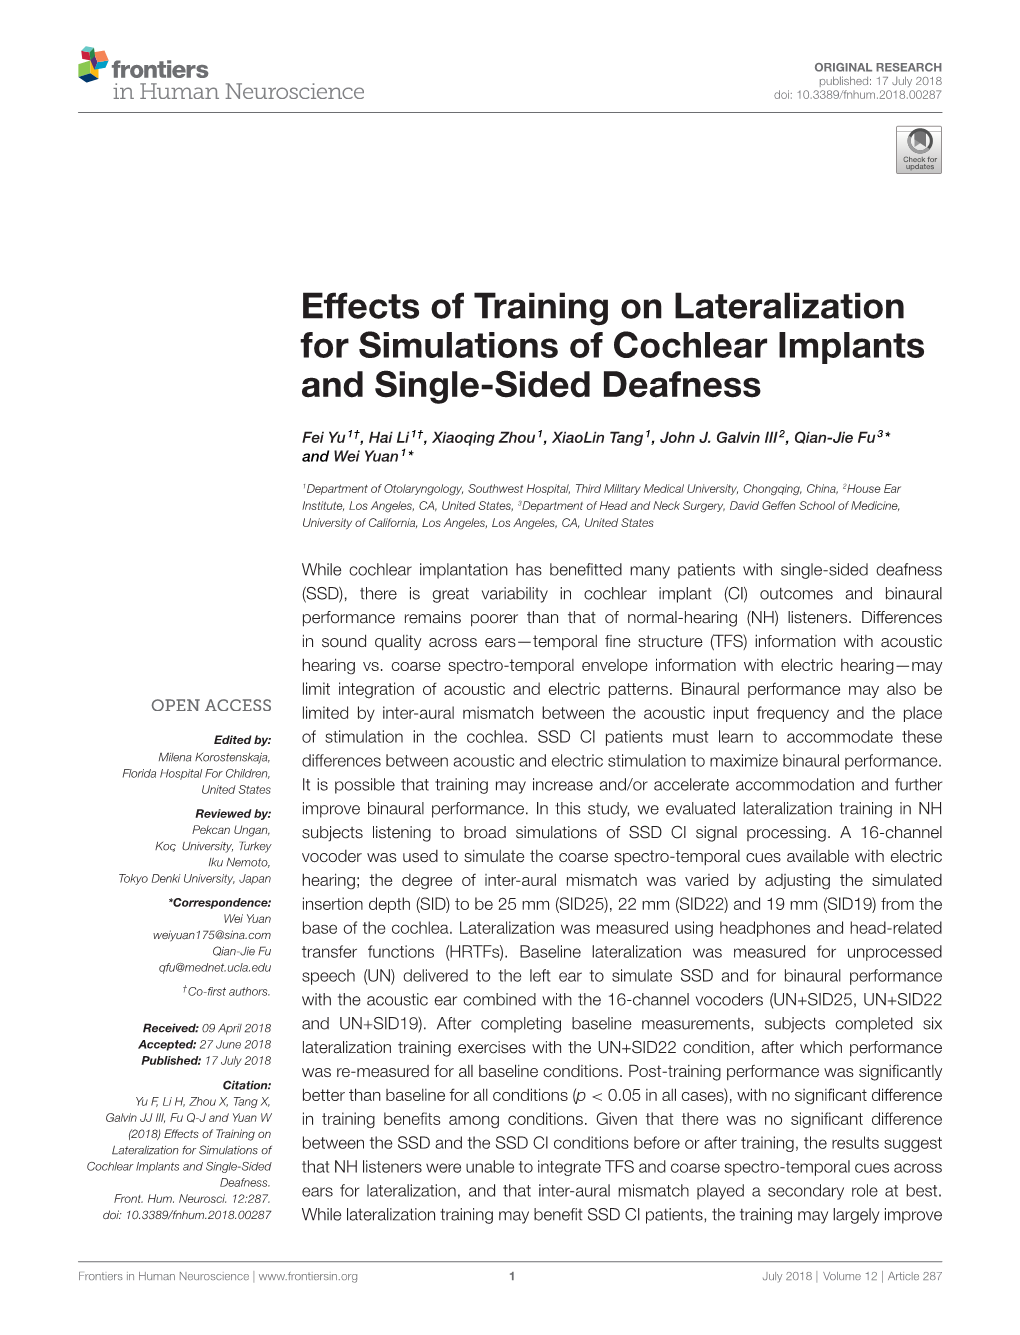 Effects of Training on Lateralization for Simulations of Cochlear Implants and Single-Sided Deafness